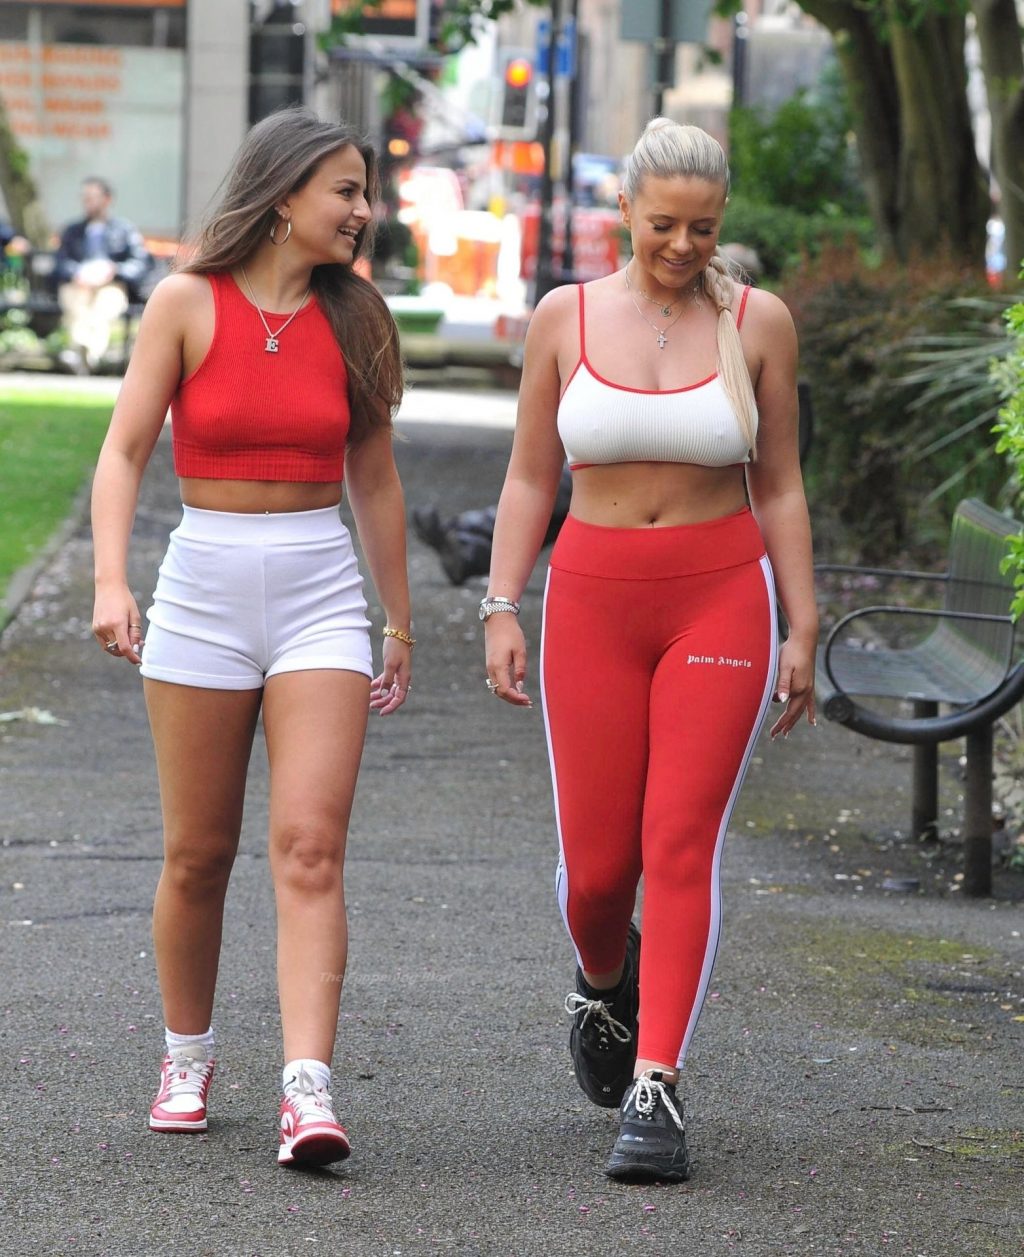 Apollonia Llewellyn is Pictured Working Out in Manchester (21 Photos)